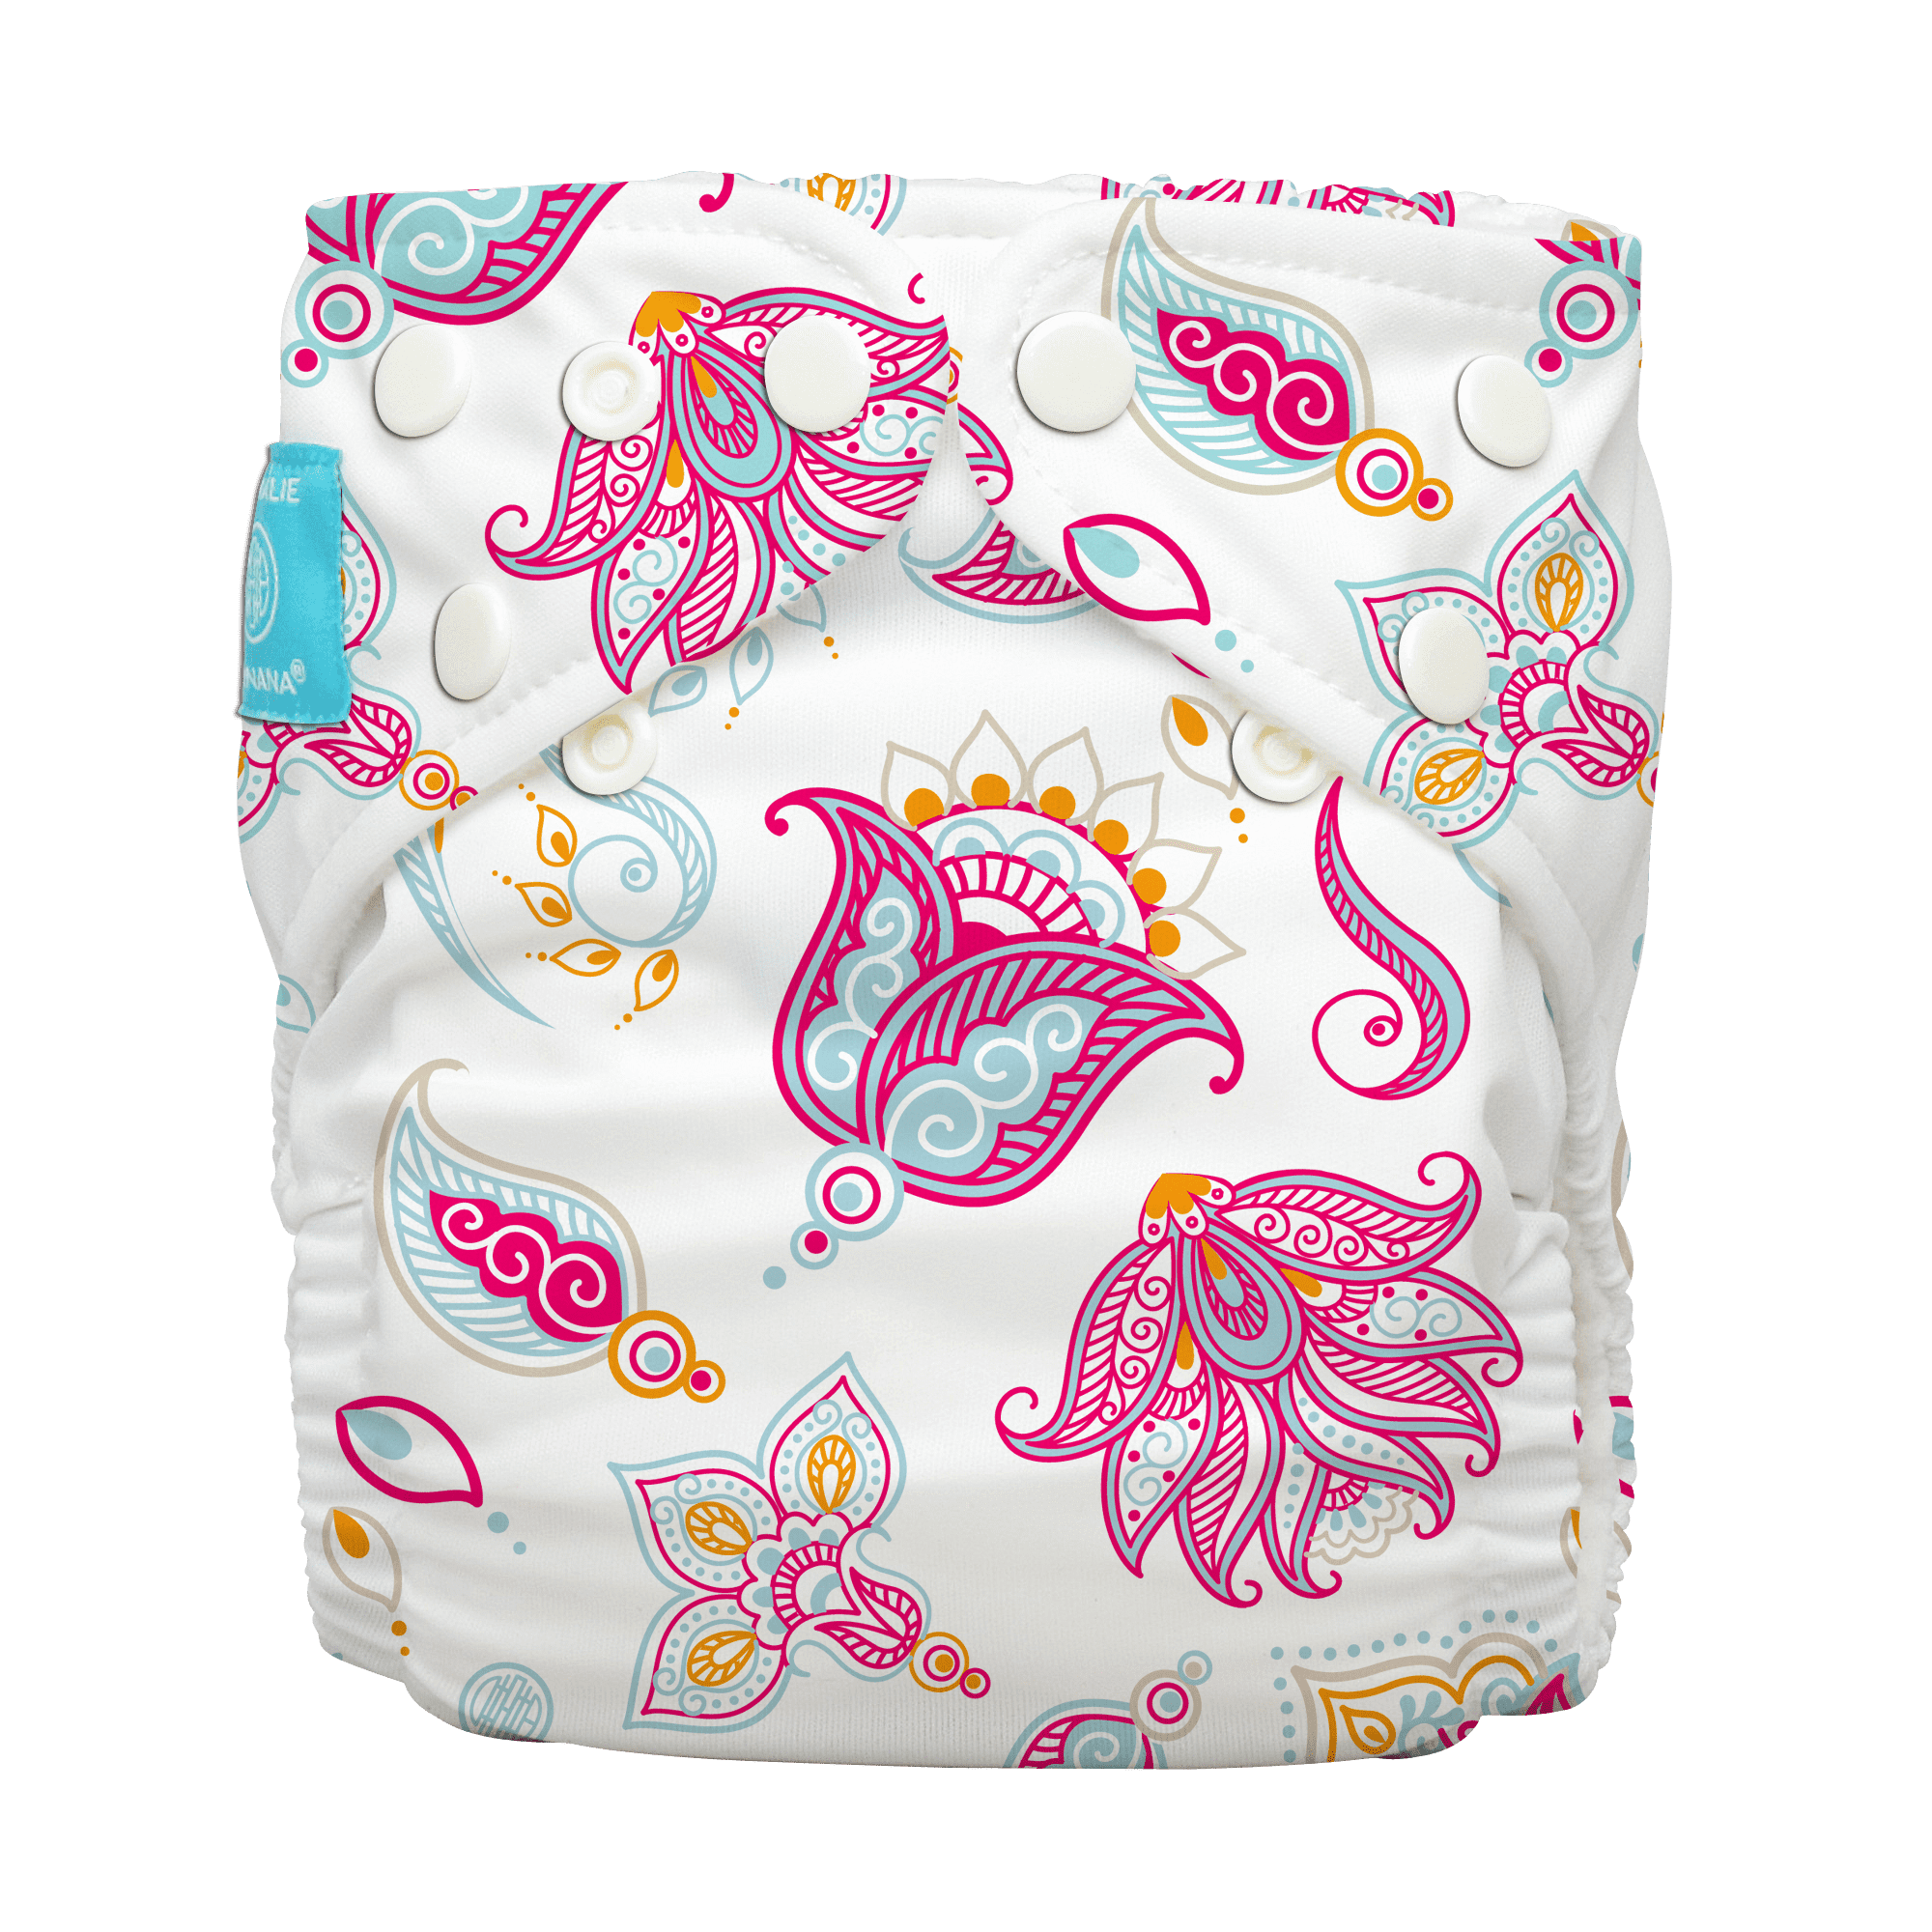 AIll in One Night AIO Cloth Diaper Nappy Sewn in Insert Reusable Washable Animal Pack 